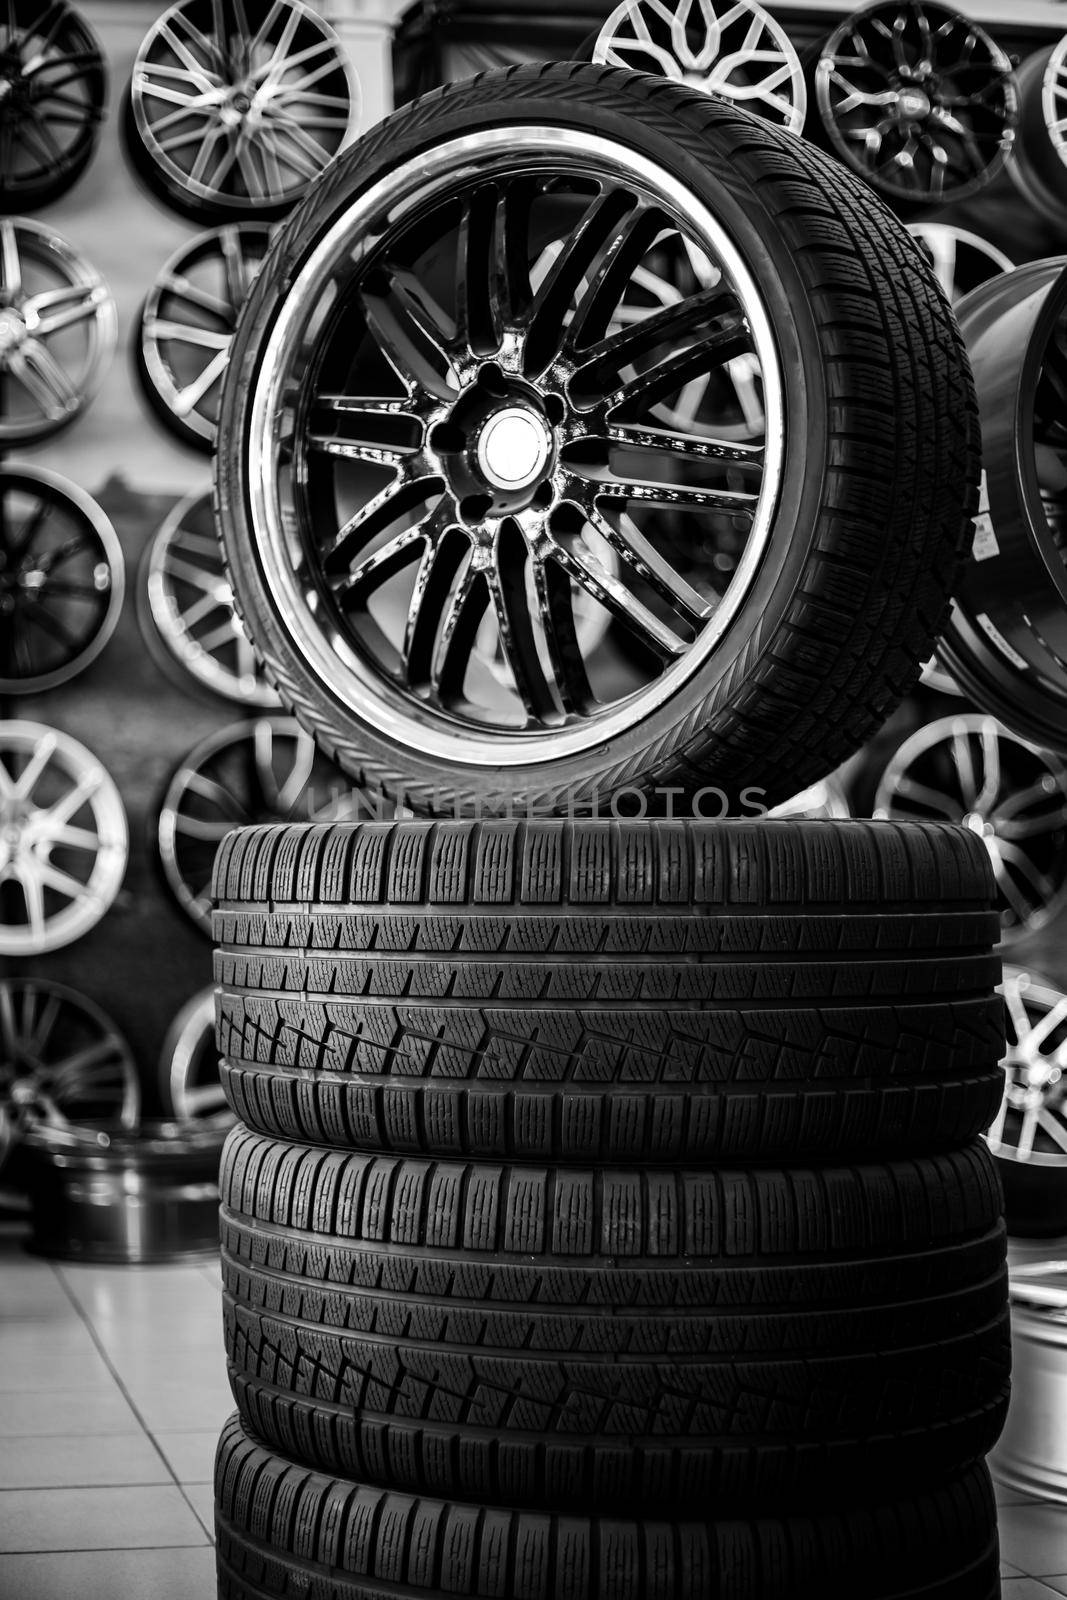 A pyramid of rubber tires and alloy wheels. Purchase and sale of new running winter and summer tires. Selective focus